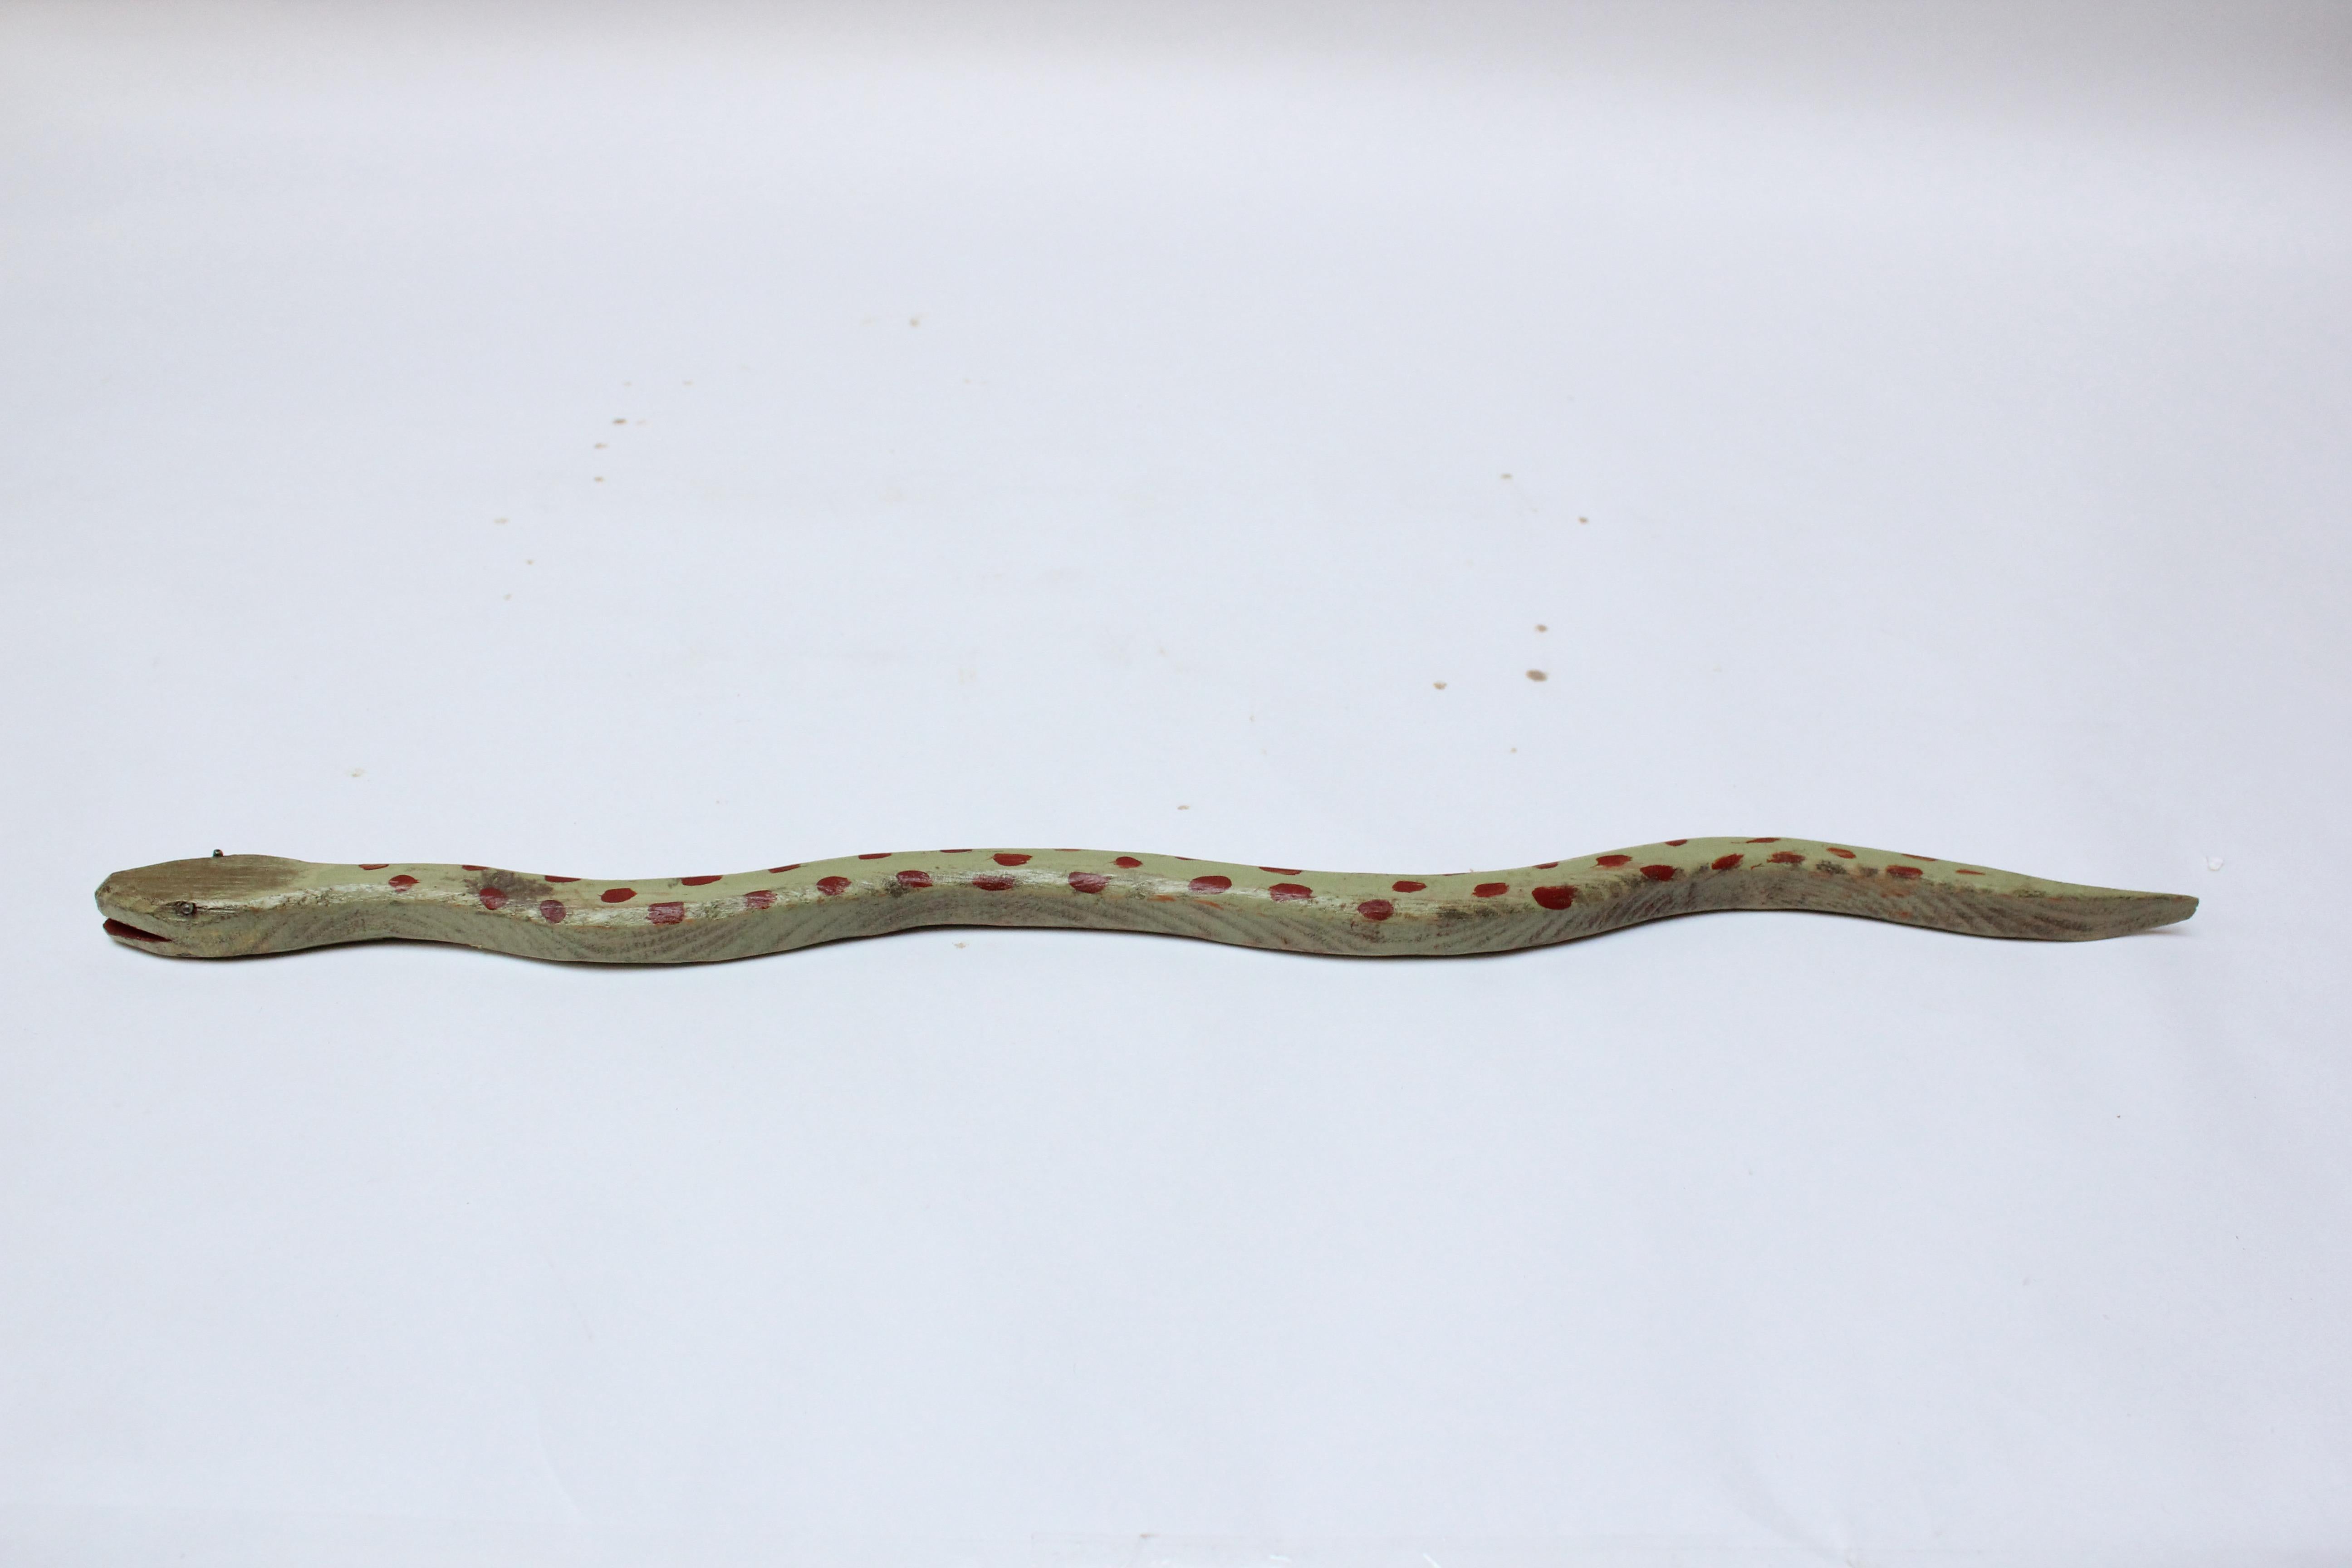 Hand-carved and painted folk art snake (ca. 1970s, USA). Attractive color combination of light green with red spots. Patina / light wear consistent with age and use.